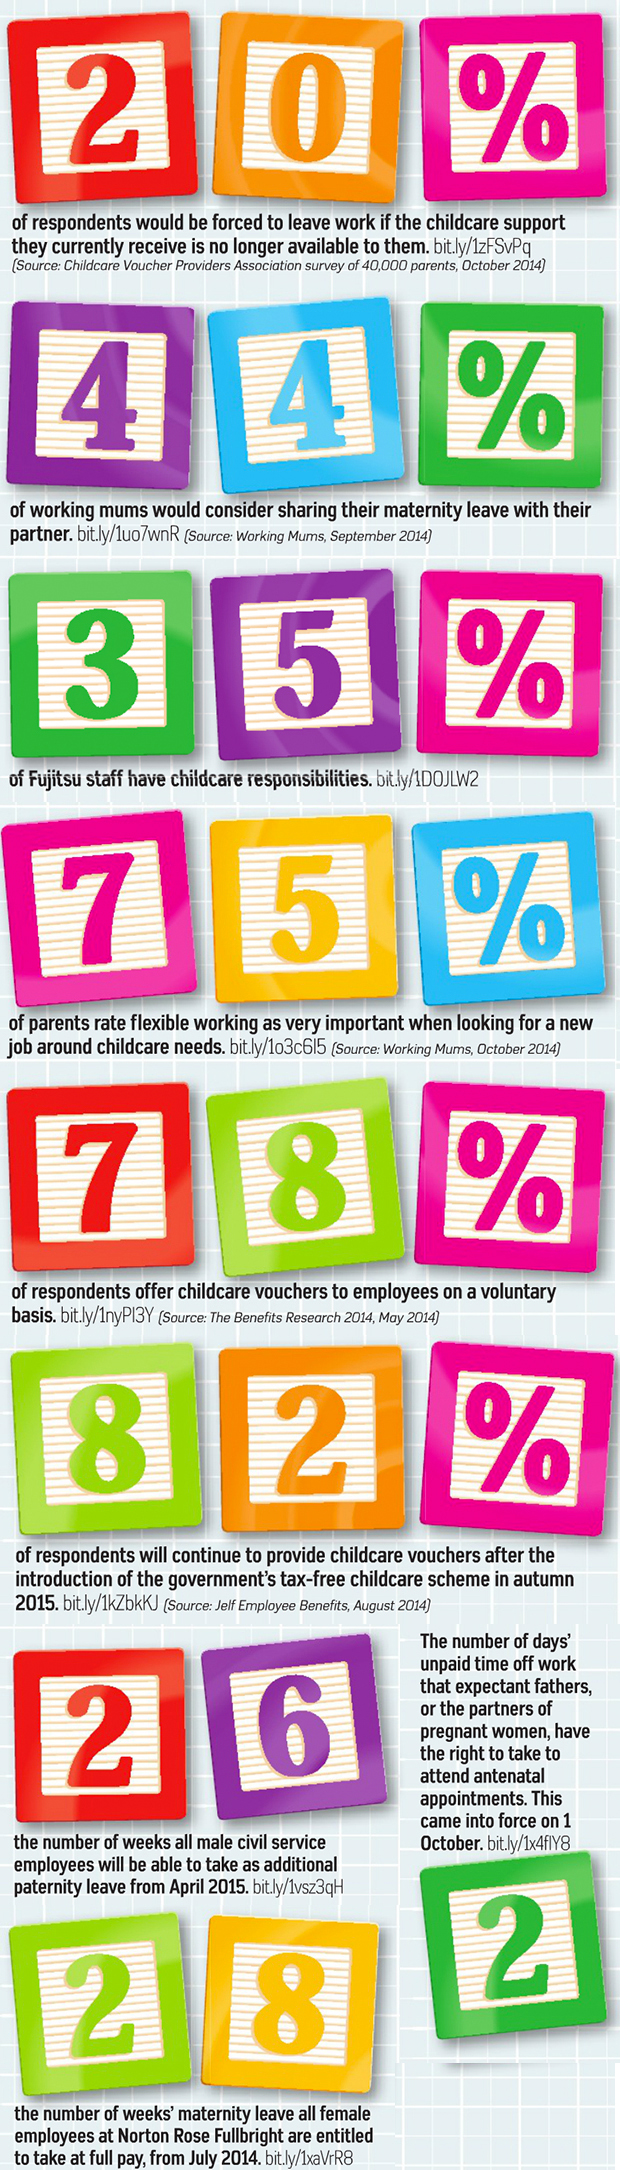 Childcare in numbers graphic